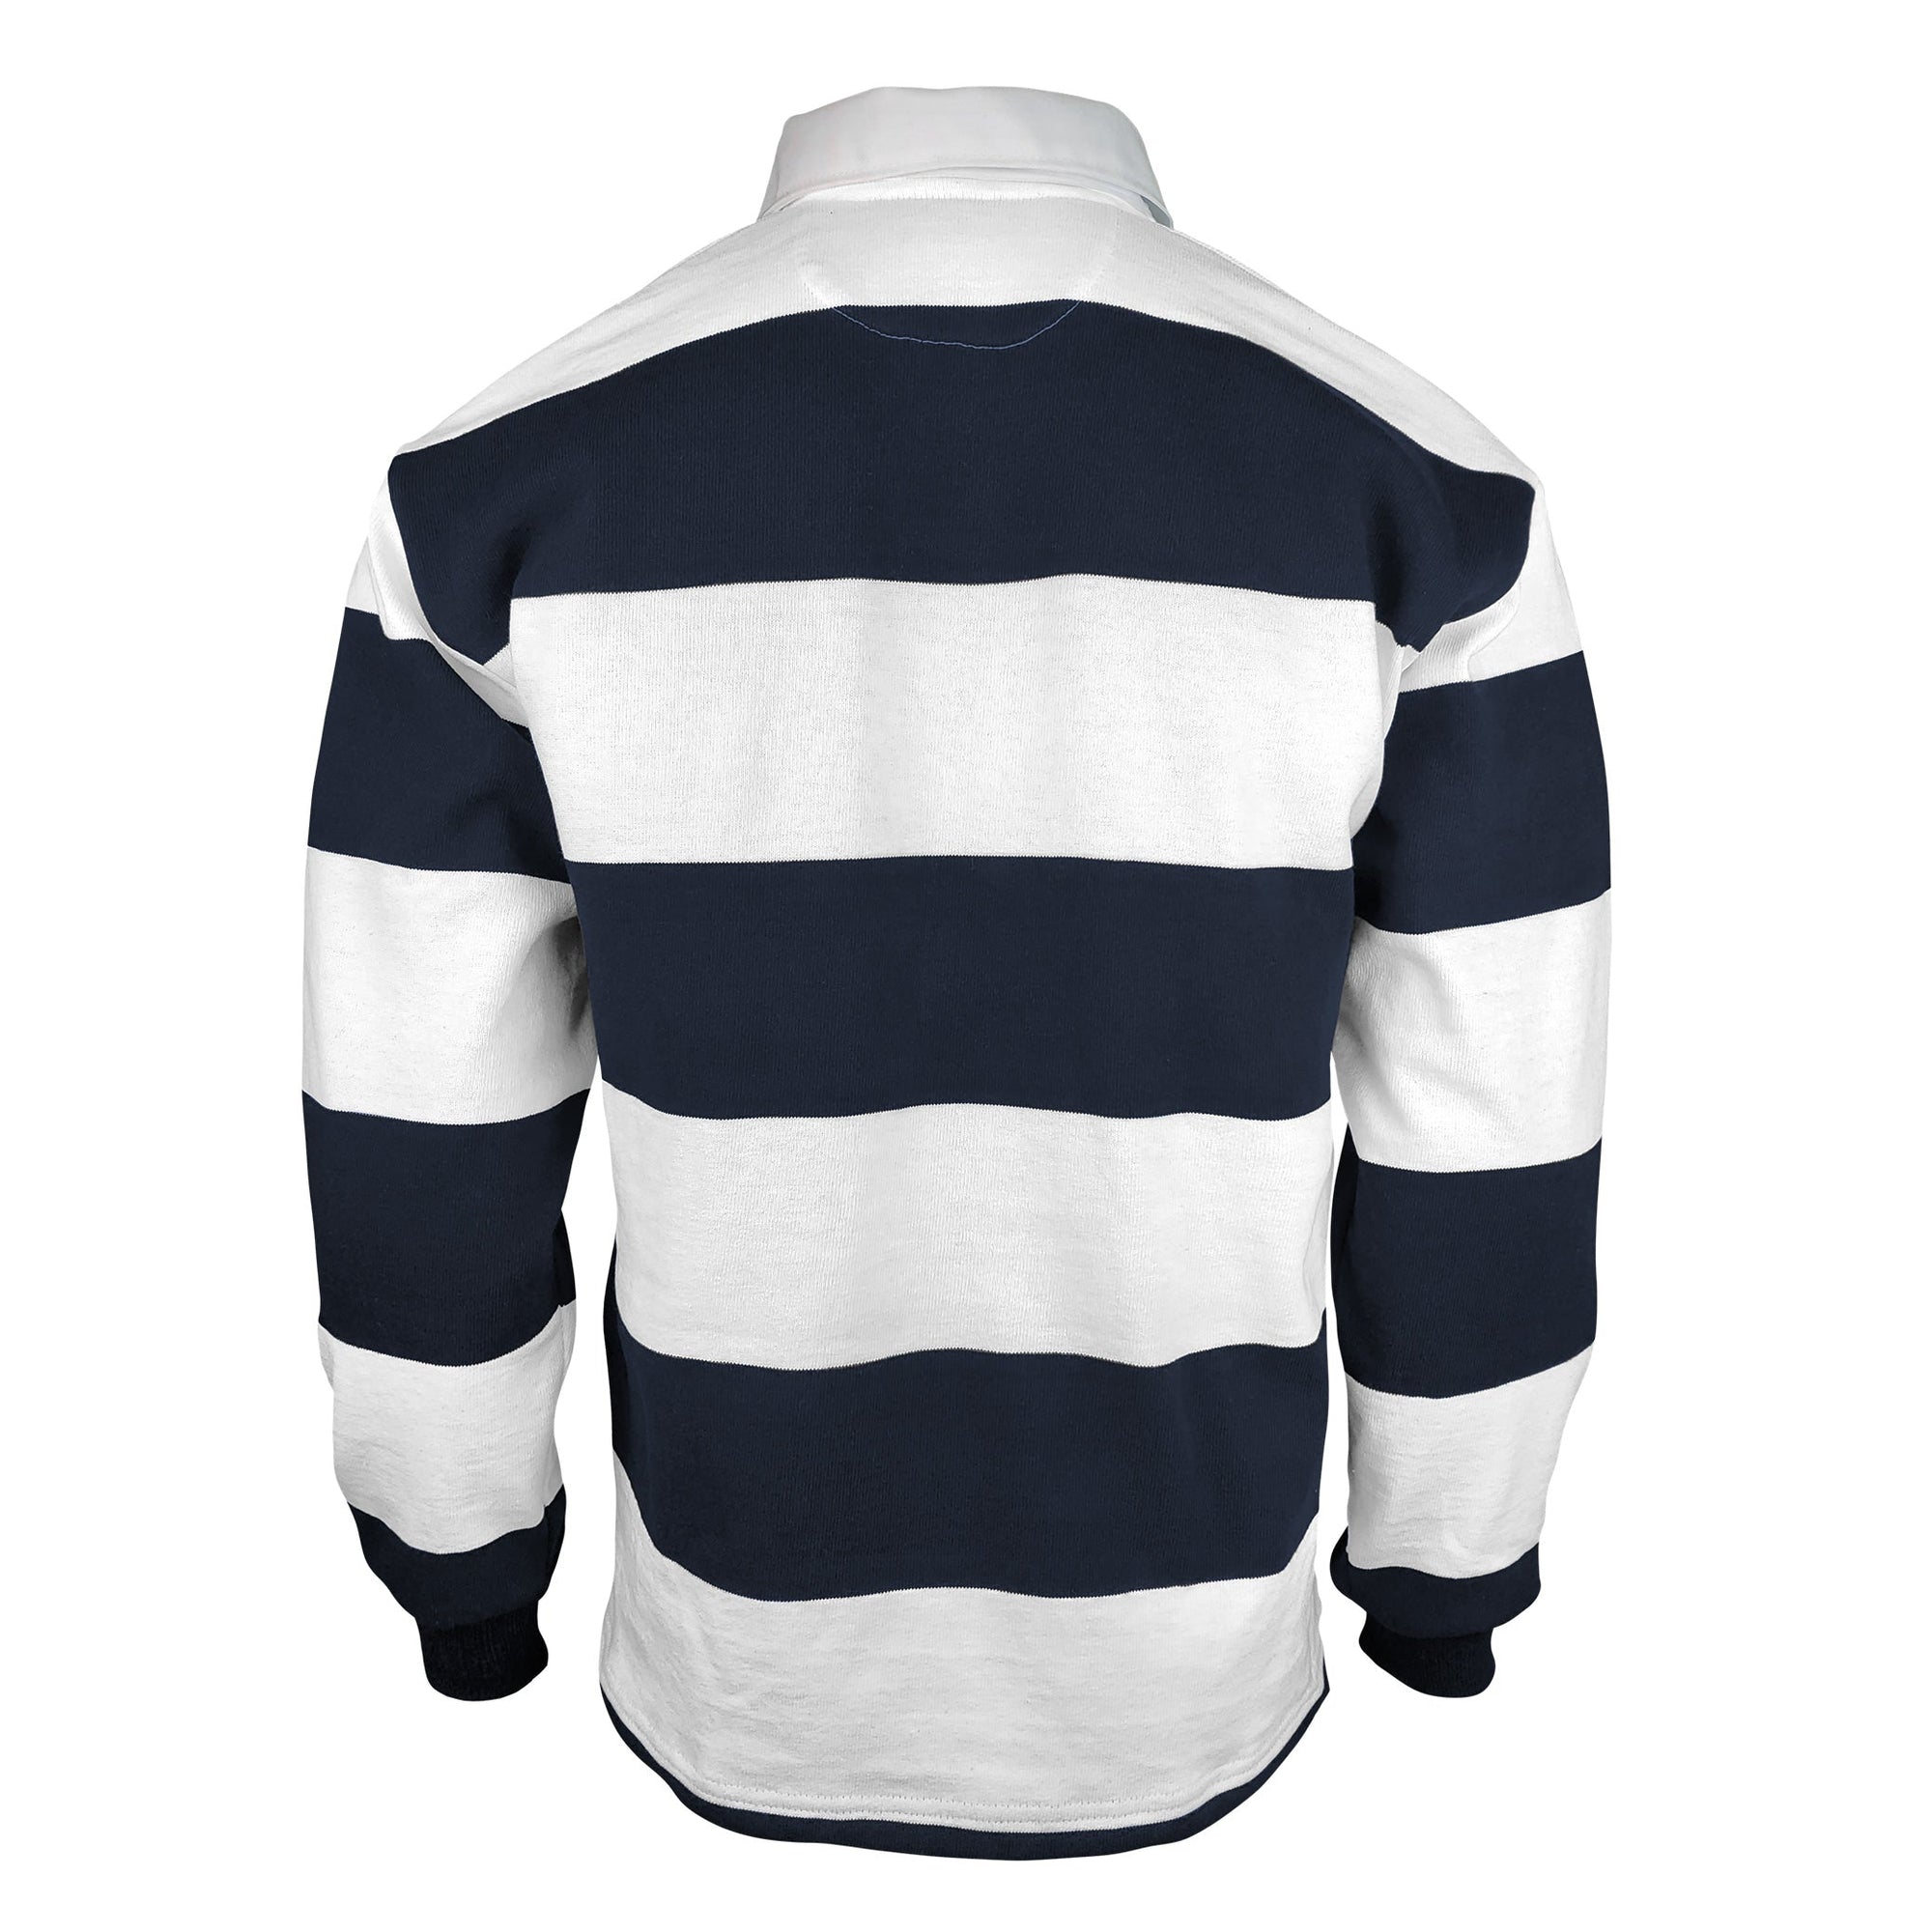 Rugby Imports UIC Men's Rugby Casual Weight Stripe Jersey